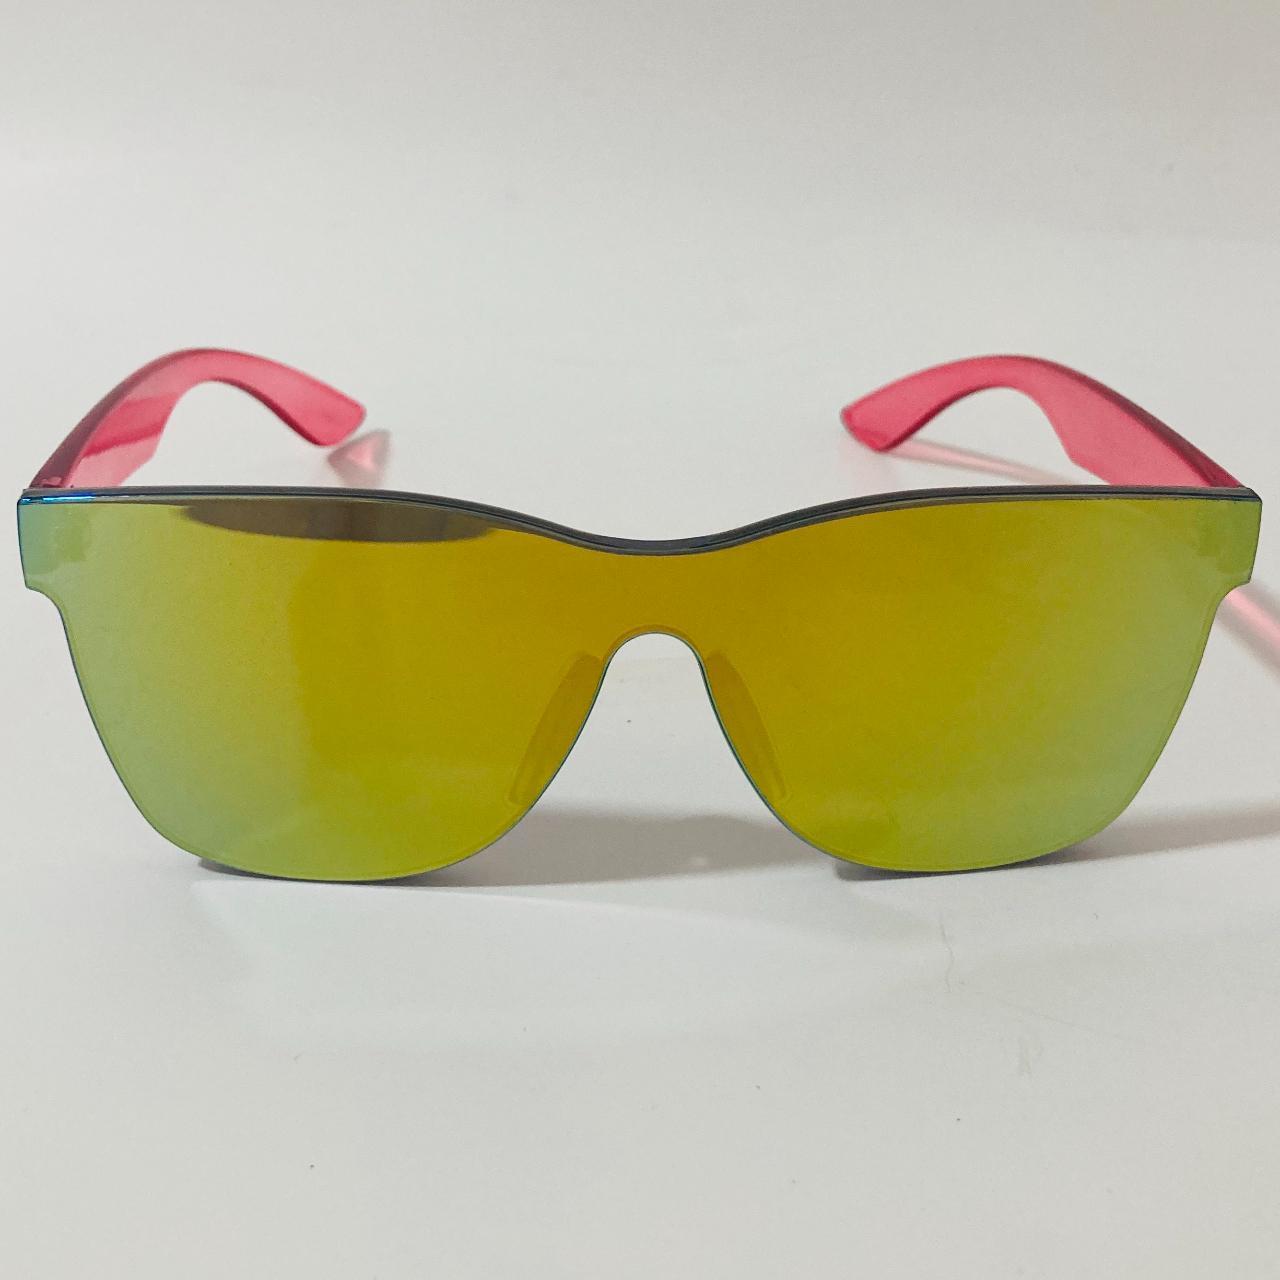 Men's Green and Pink Sunglasses (2)